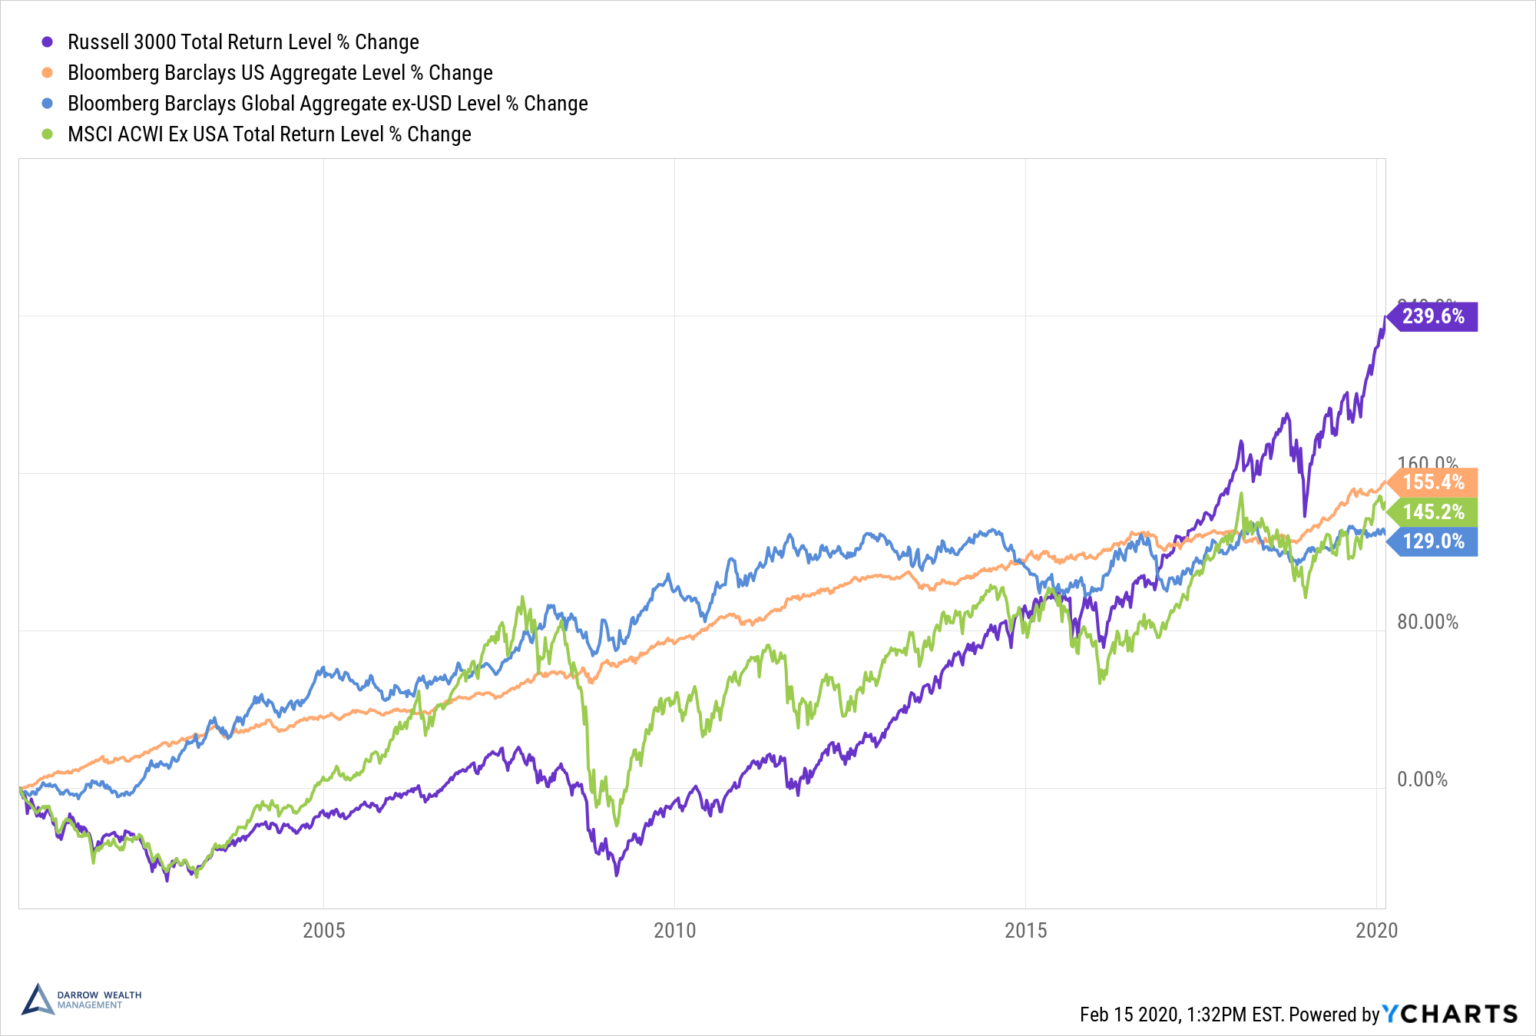 Global Bonds and Equities over time Darrow Wealth Management